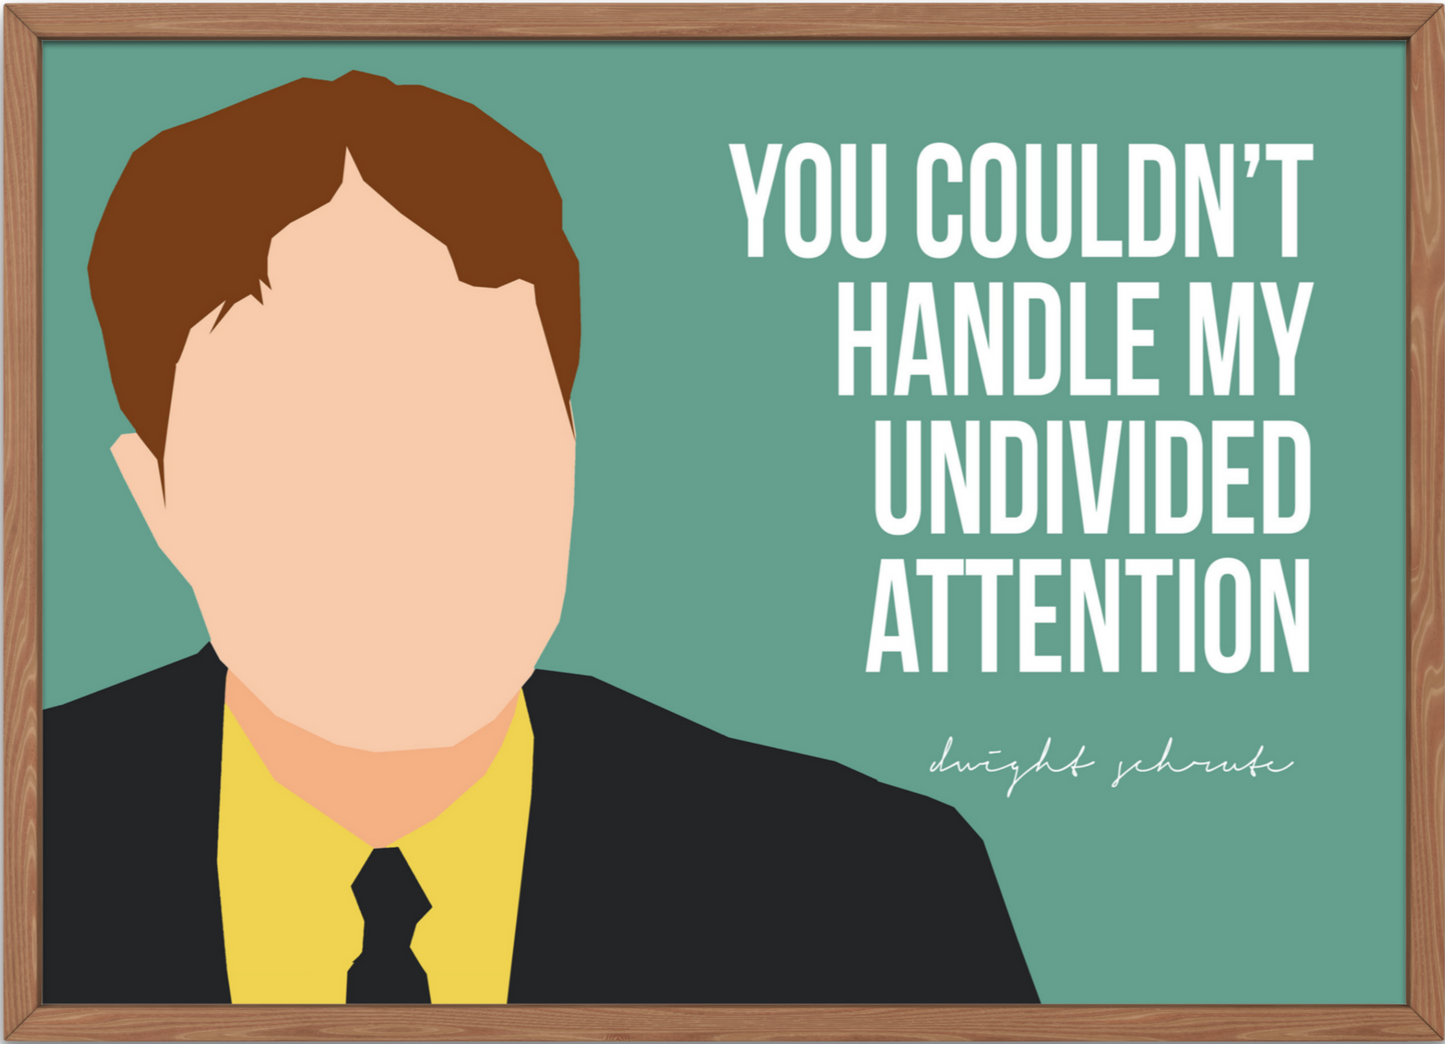 The Office Poster | Dwight Schrute - "You couldn’t handle my undivided attention"